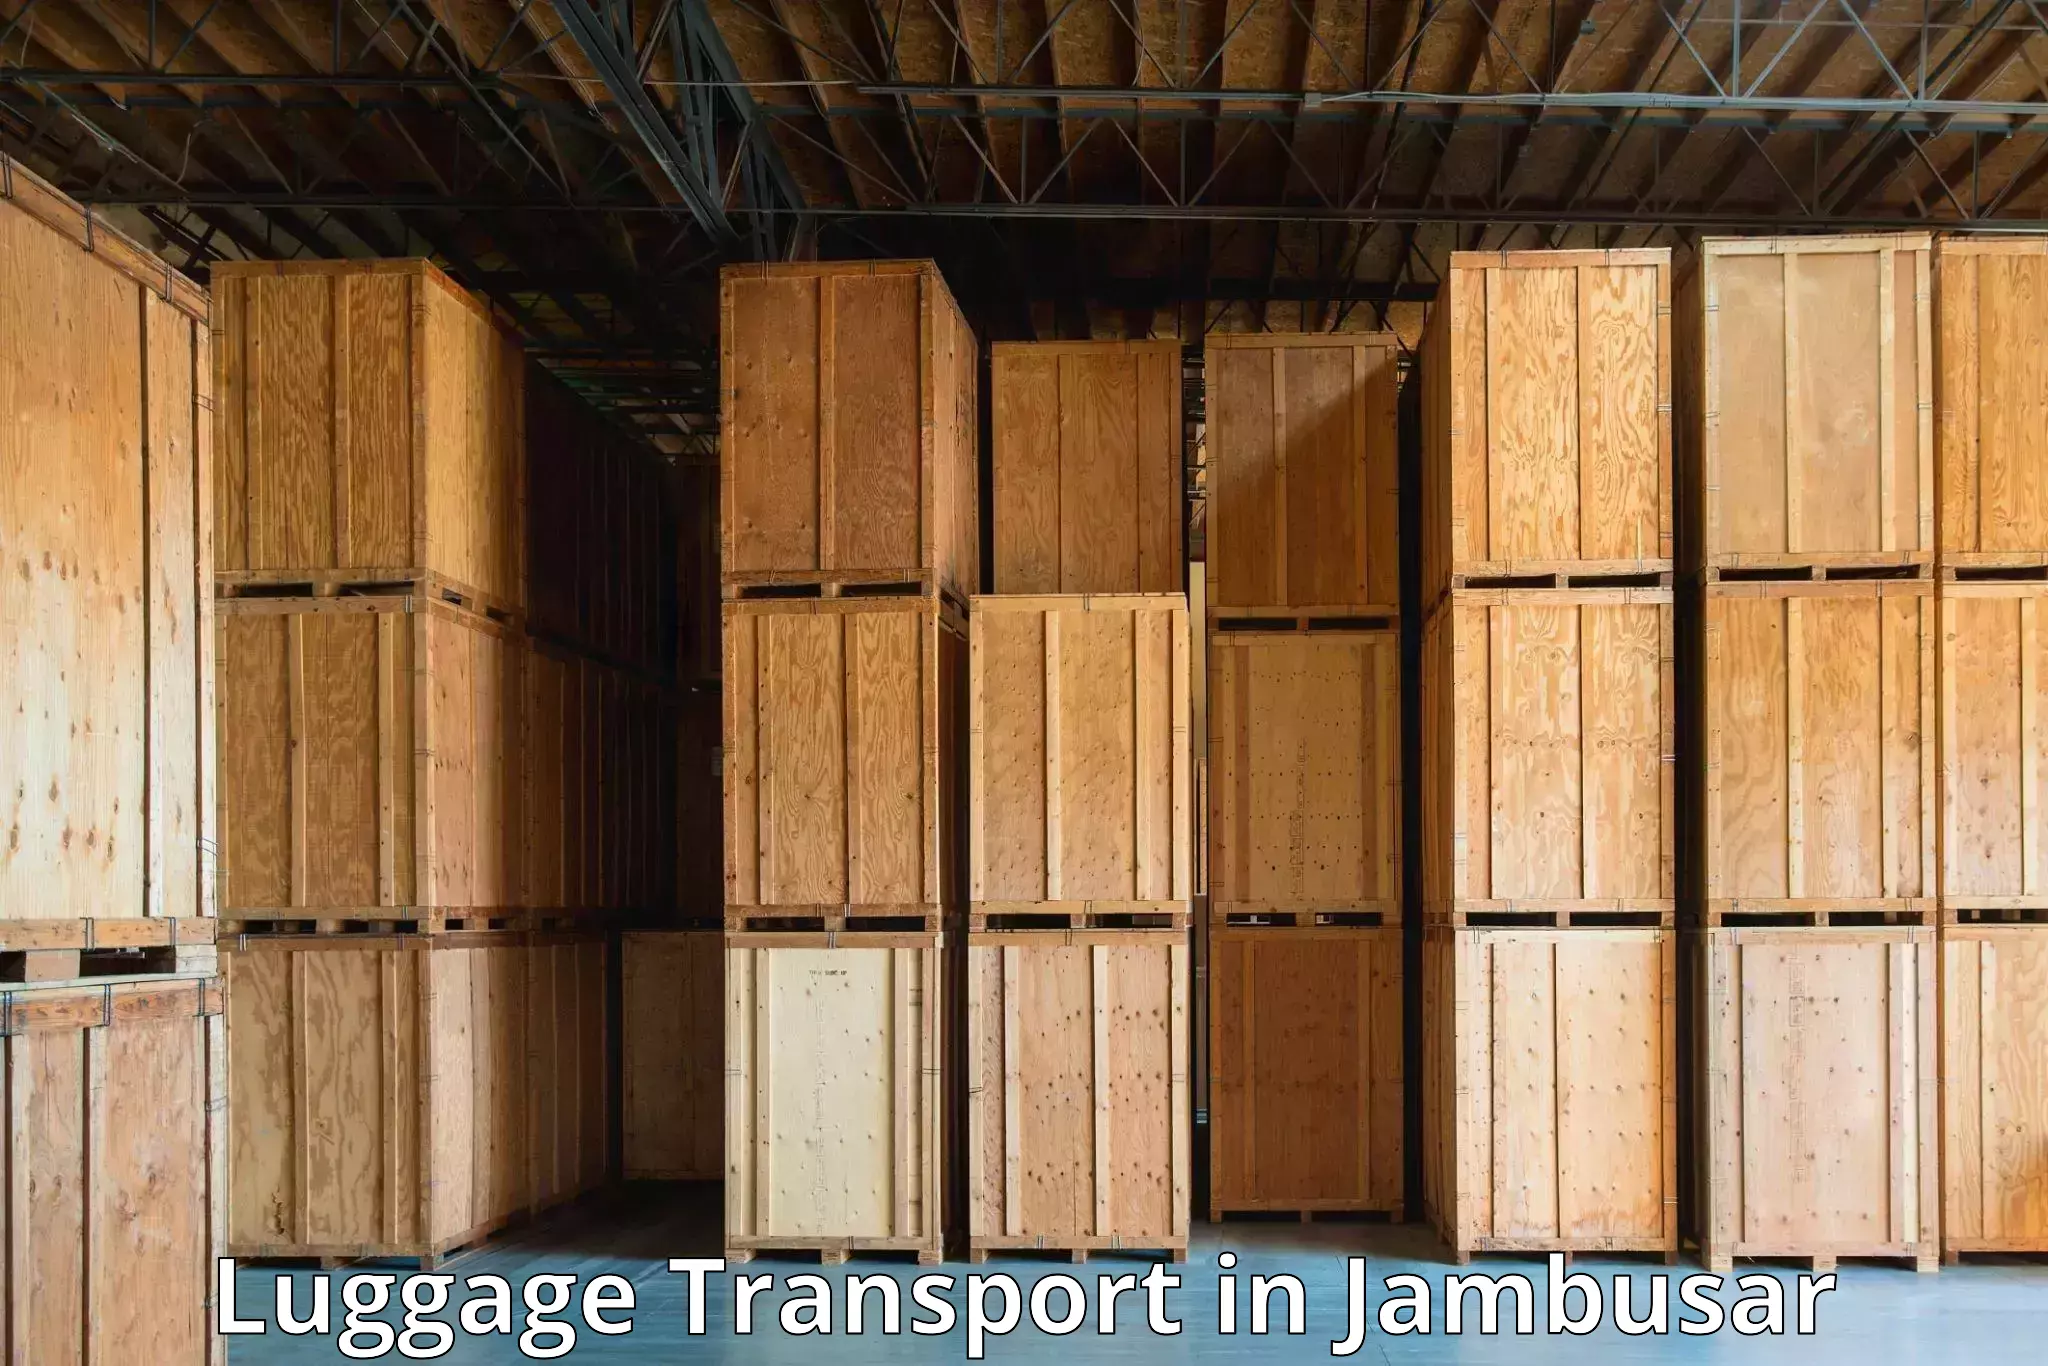 Luggage shipment strategy in Jambusar